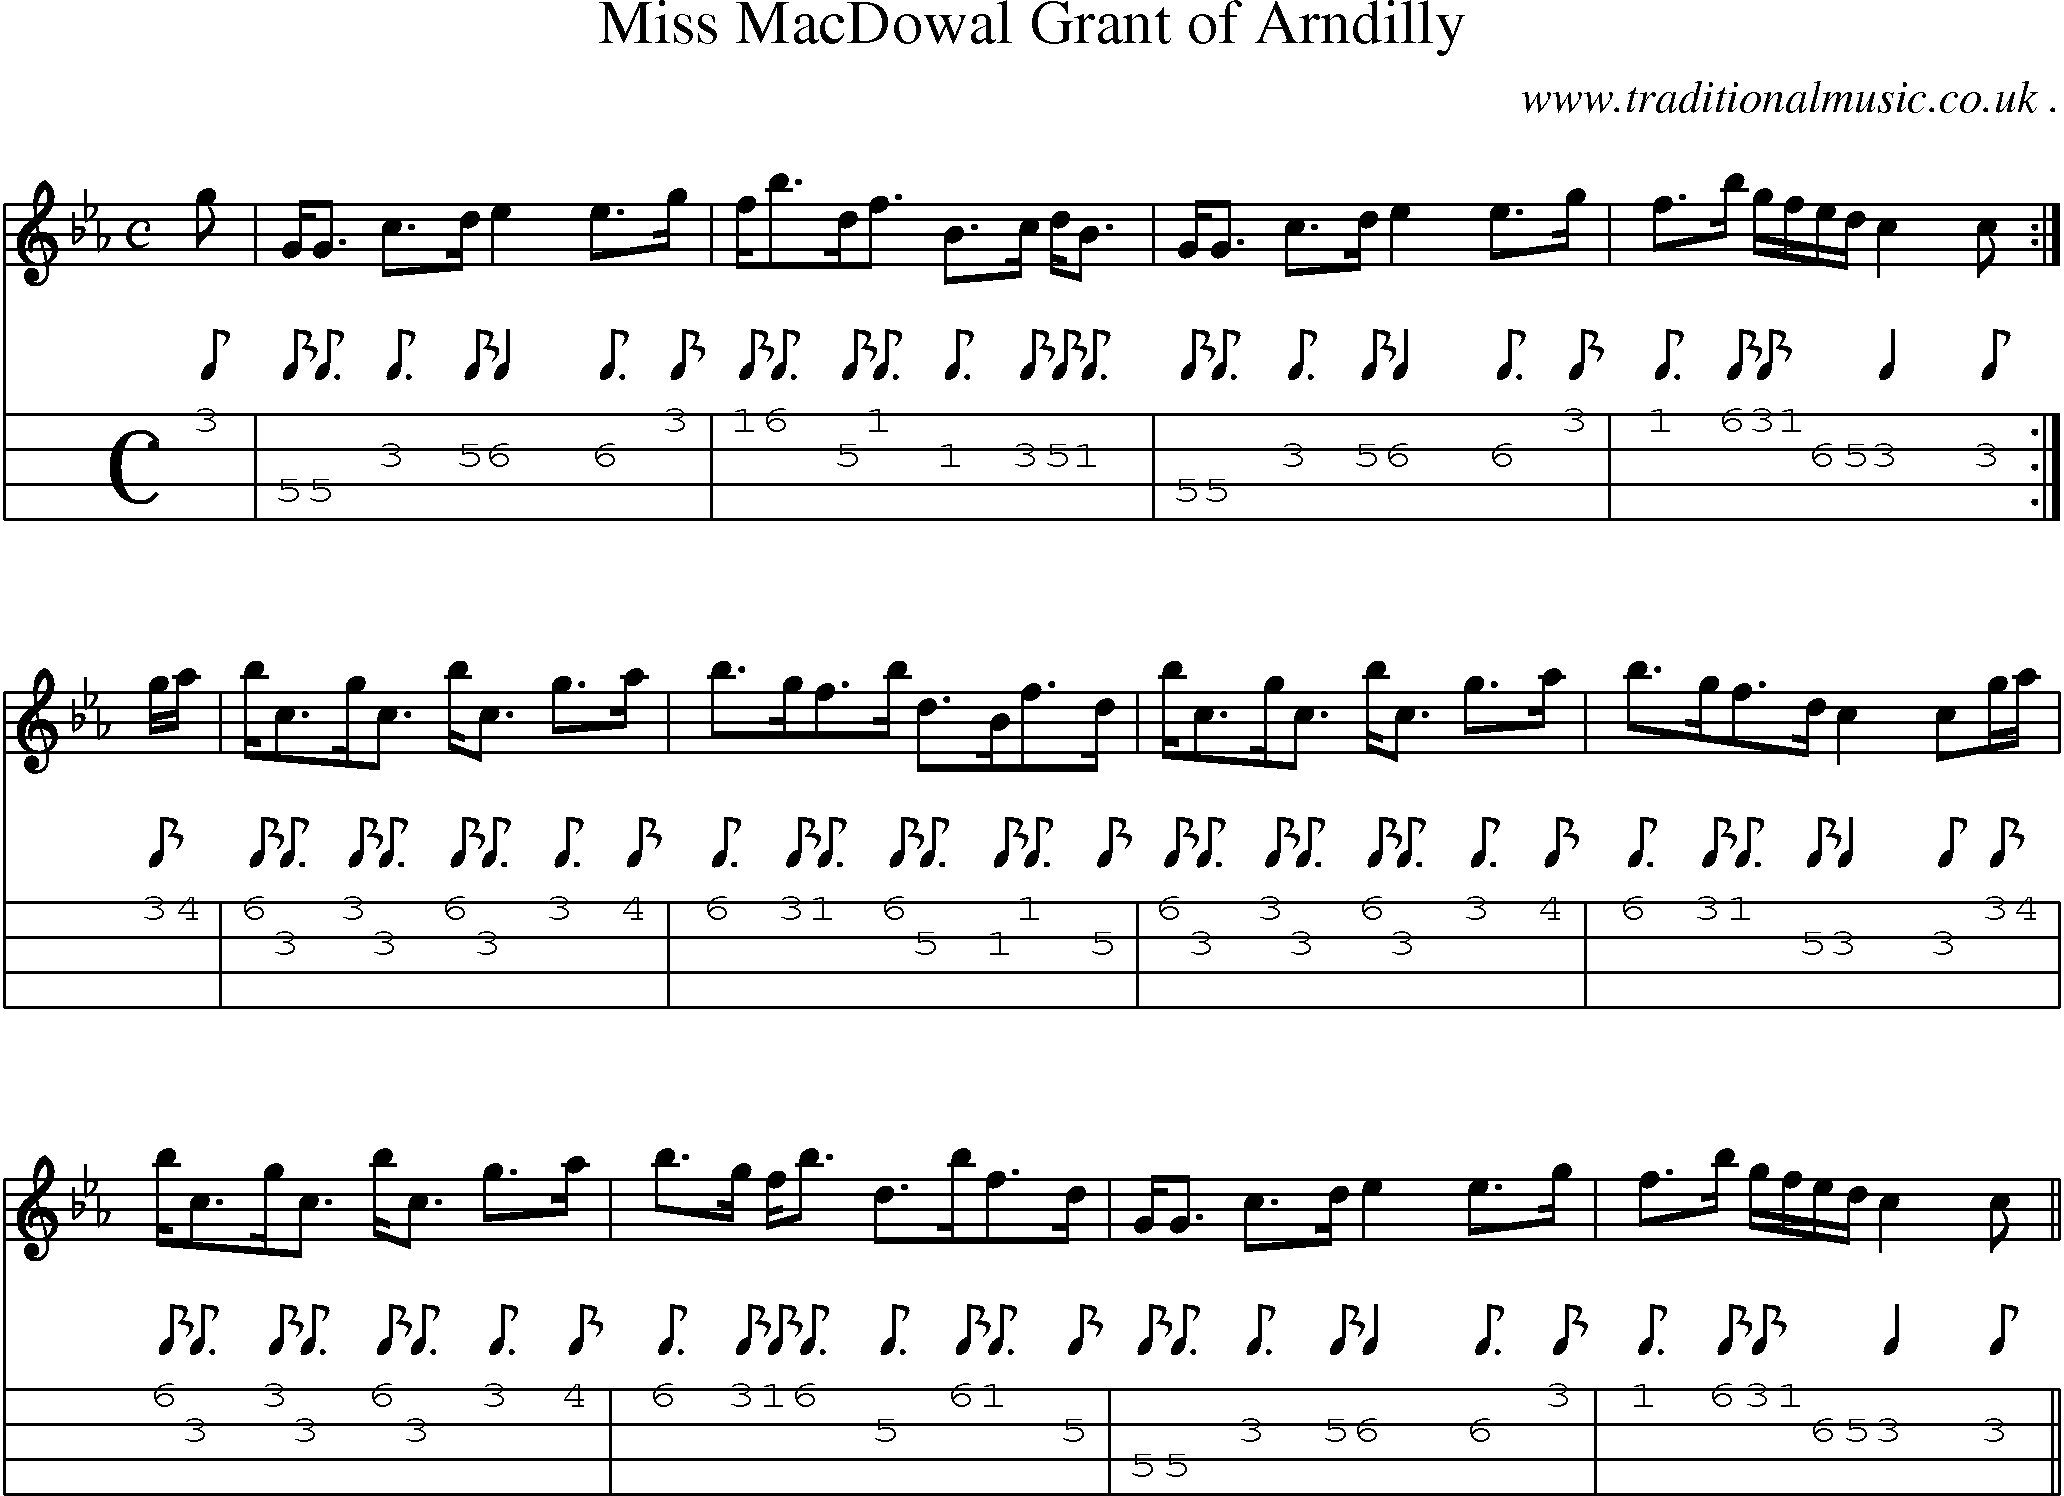 Sheet-music  score, Chords and Mandolin Tabs for Miss Macdowal Grant Of Arndilly